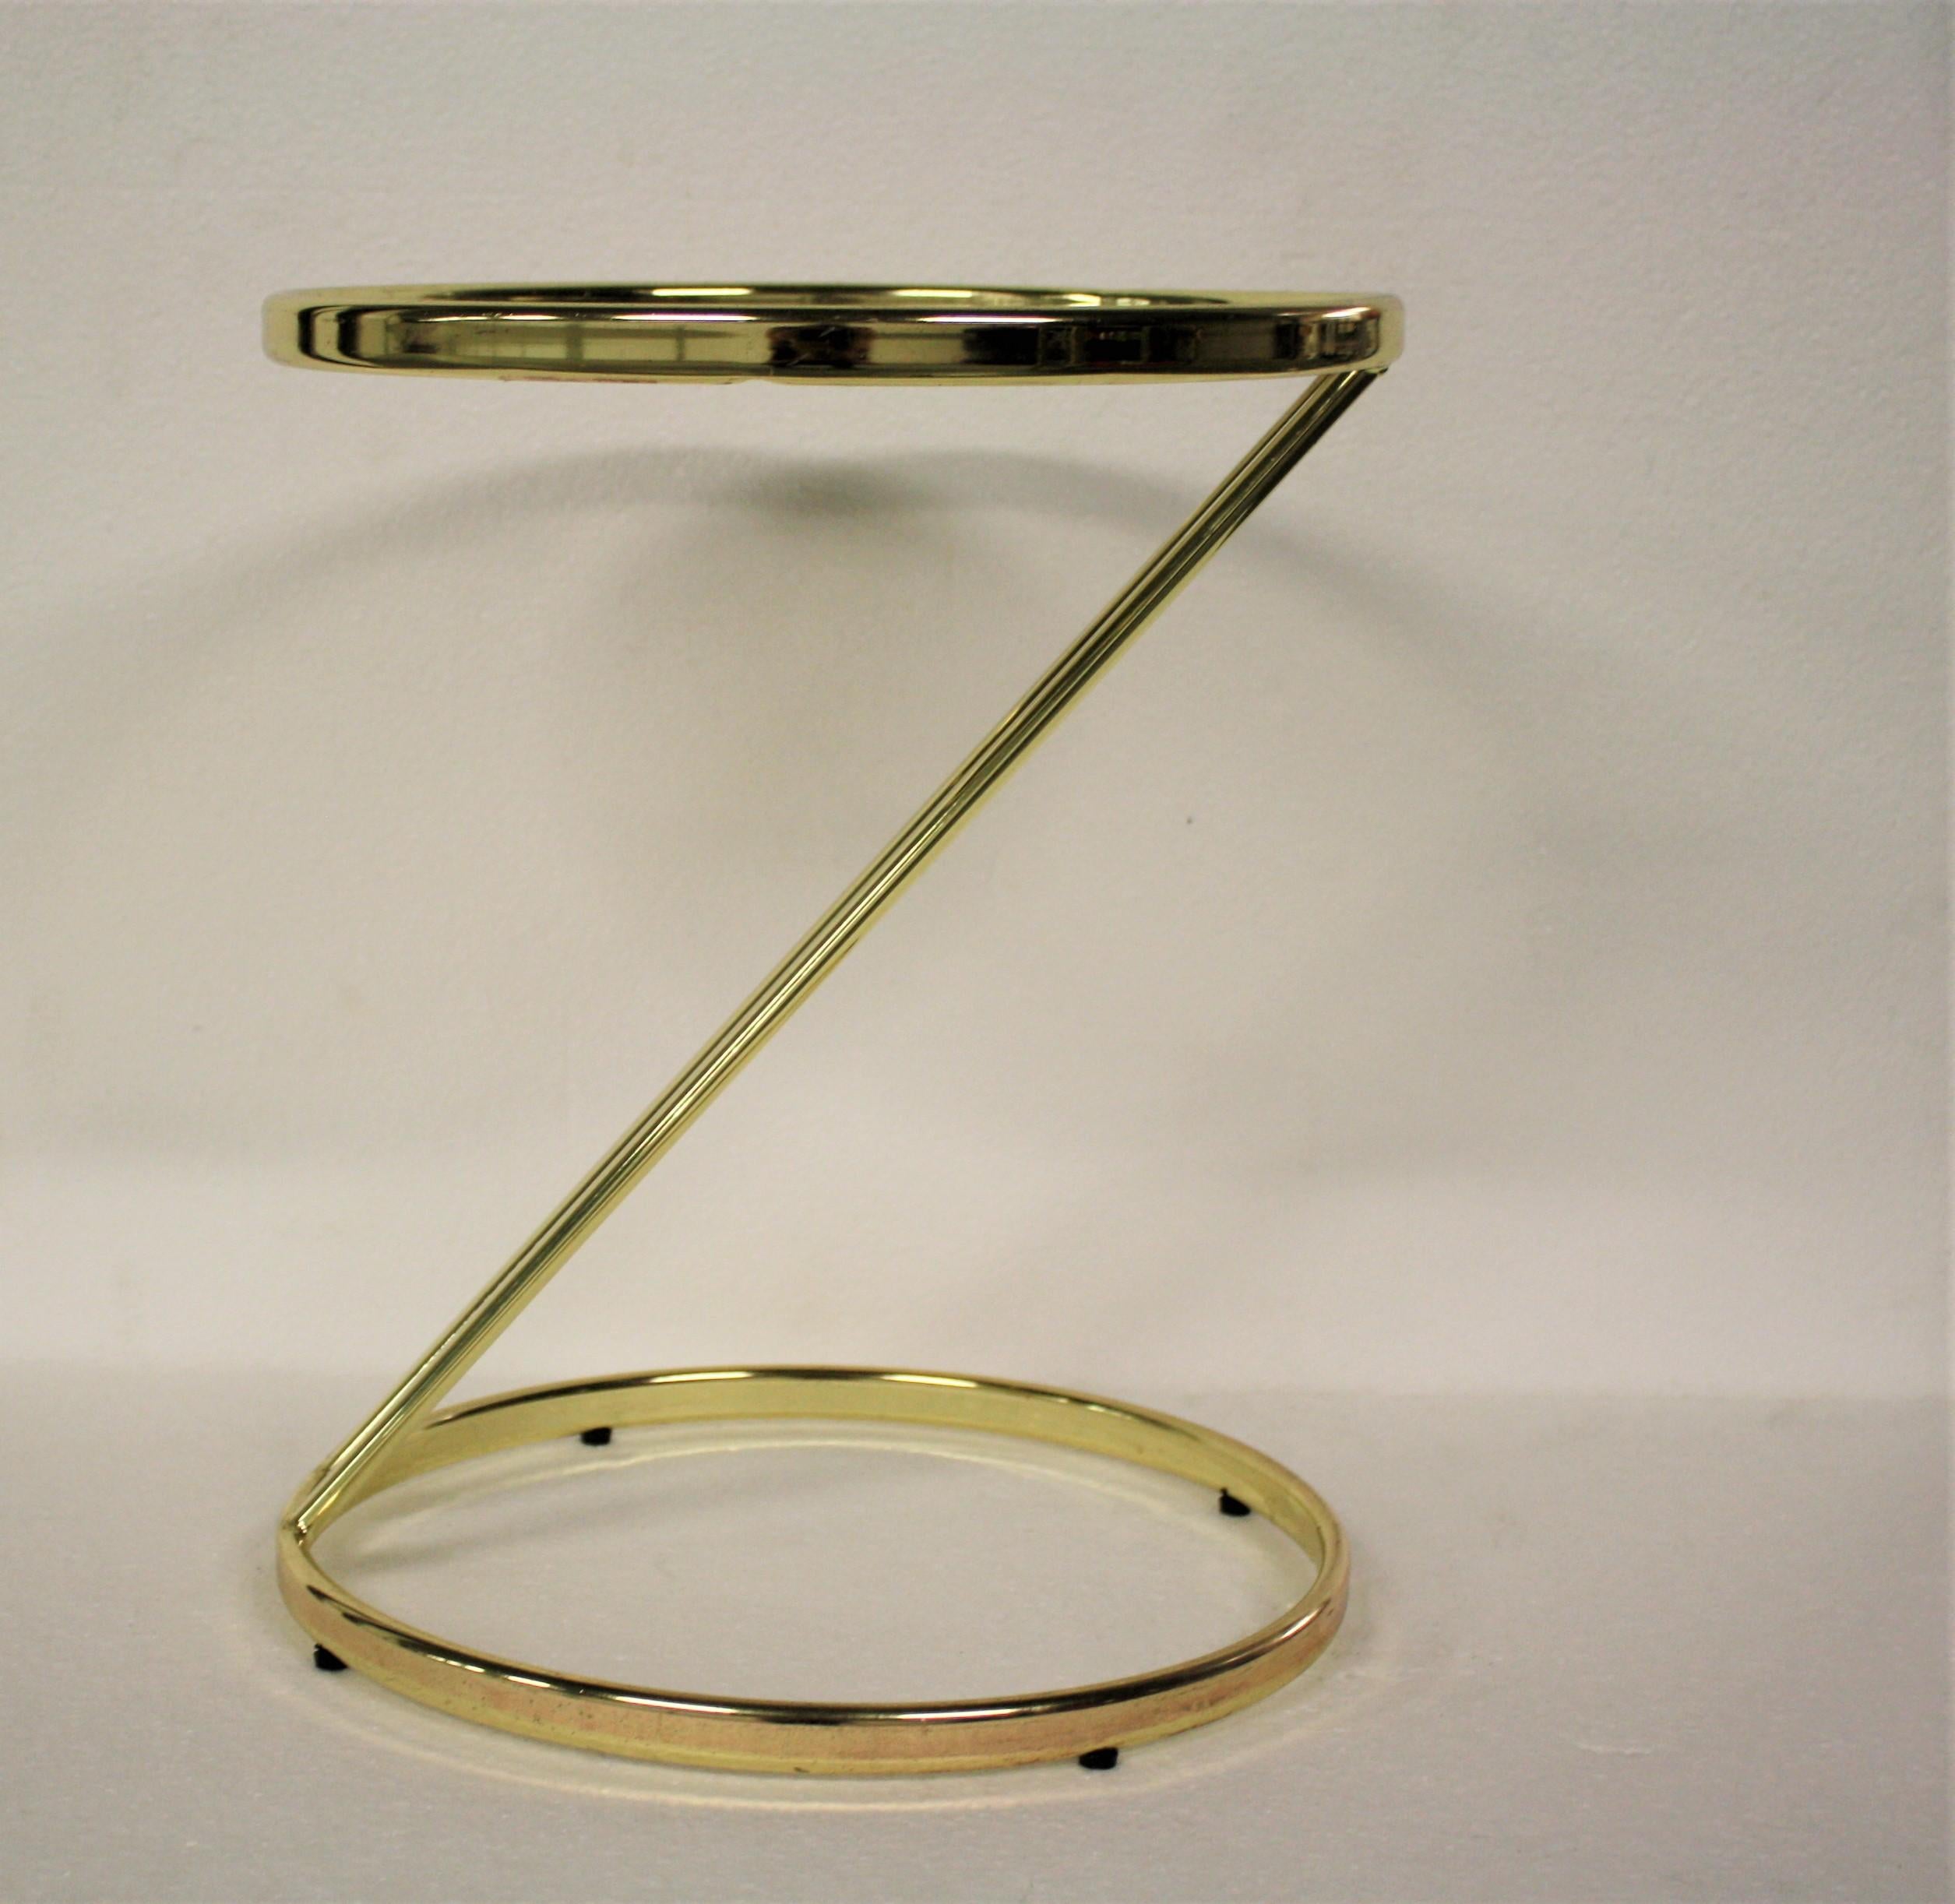 Vintage brass Z-shaped side table or plant stand with smoked glass.

Good condition.

Late 1970s, Belgium

Measure: Height 41 cm /16.14